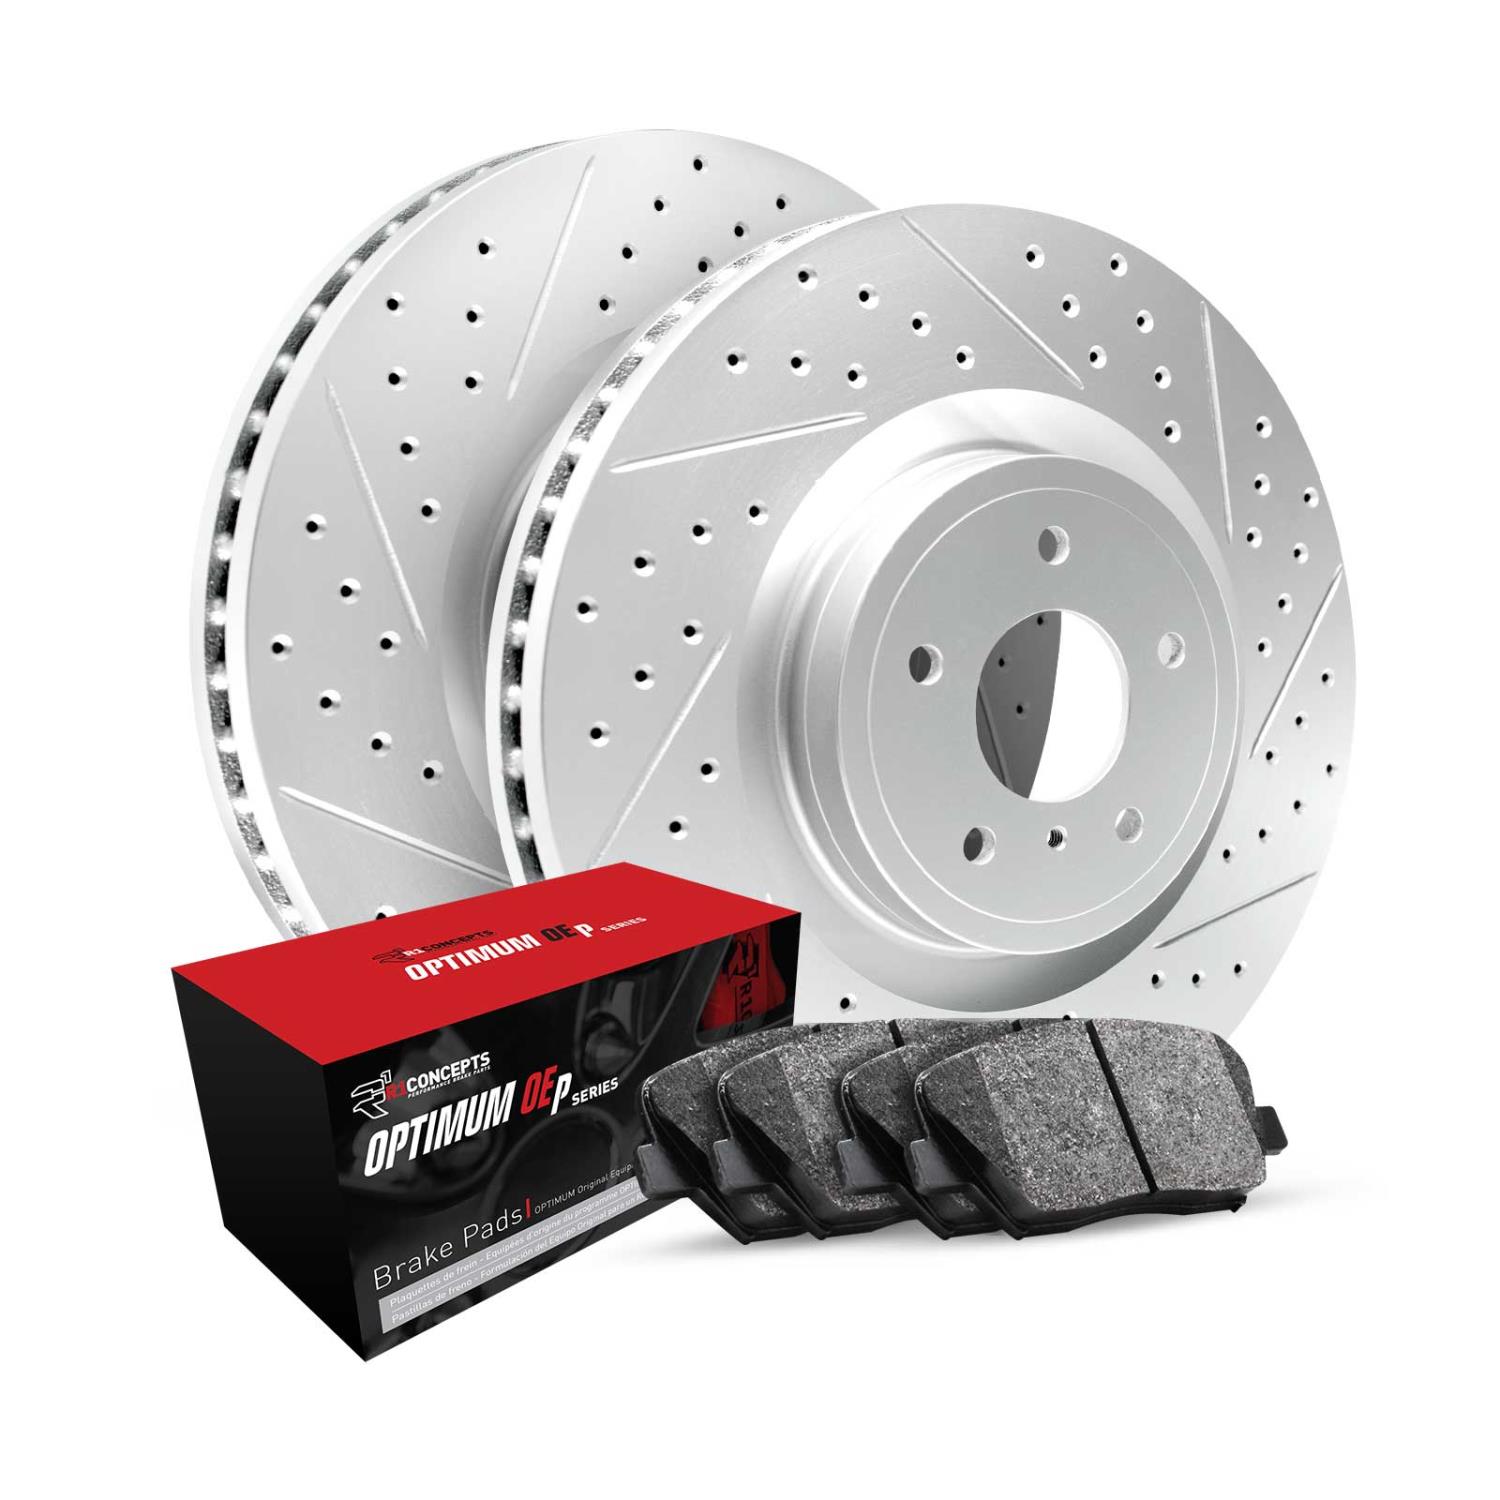 GEO-Carbon Drilled & Slotted Brake Rotor Set w/Optimum OE Pads, Fits Select Fits Multiple Makes/Models, Position: Rear